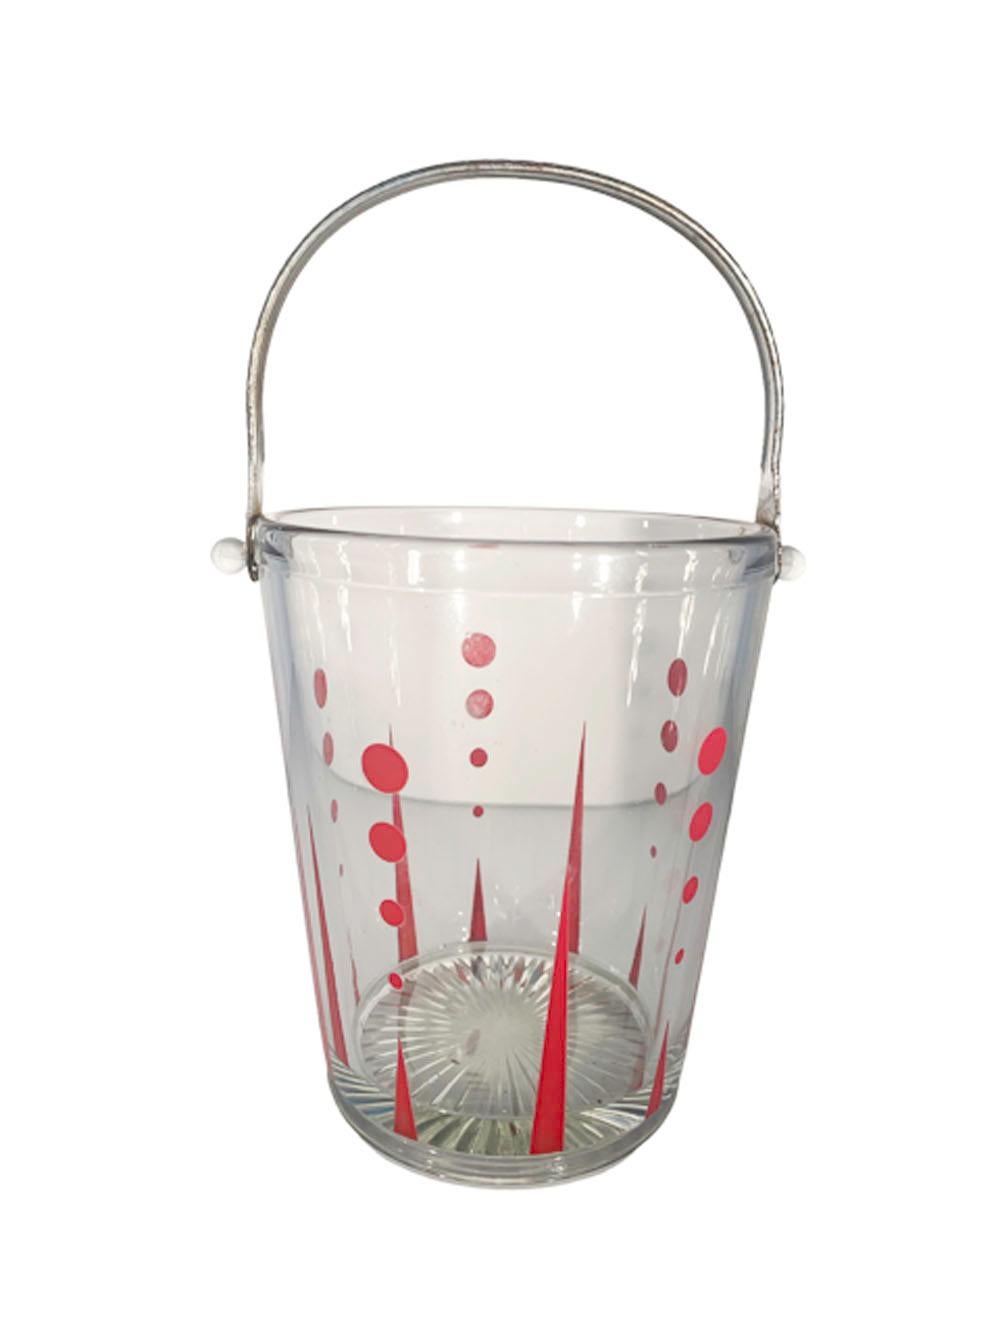 Art Deco bar suite in clear glass with red enamel decoration having long and short arrows pointing up from the bottom below graduated dots getting larger as they go up the side of each piece. The suite consists of a cocktail shaker with aluminum